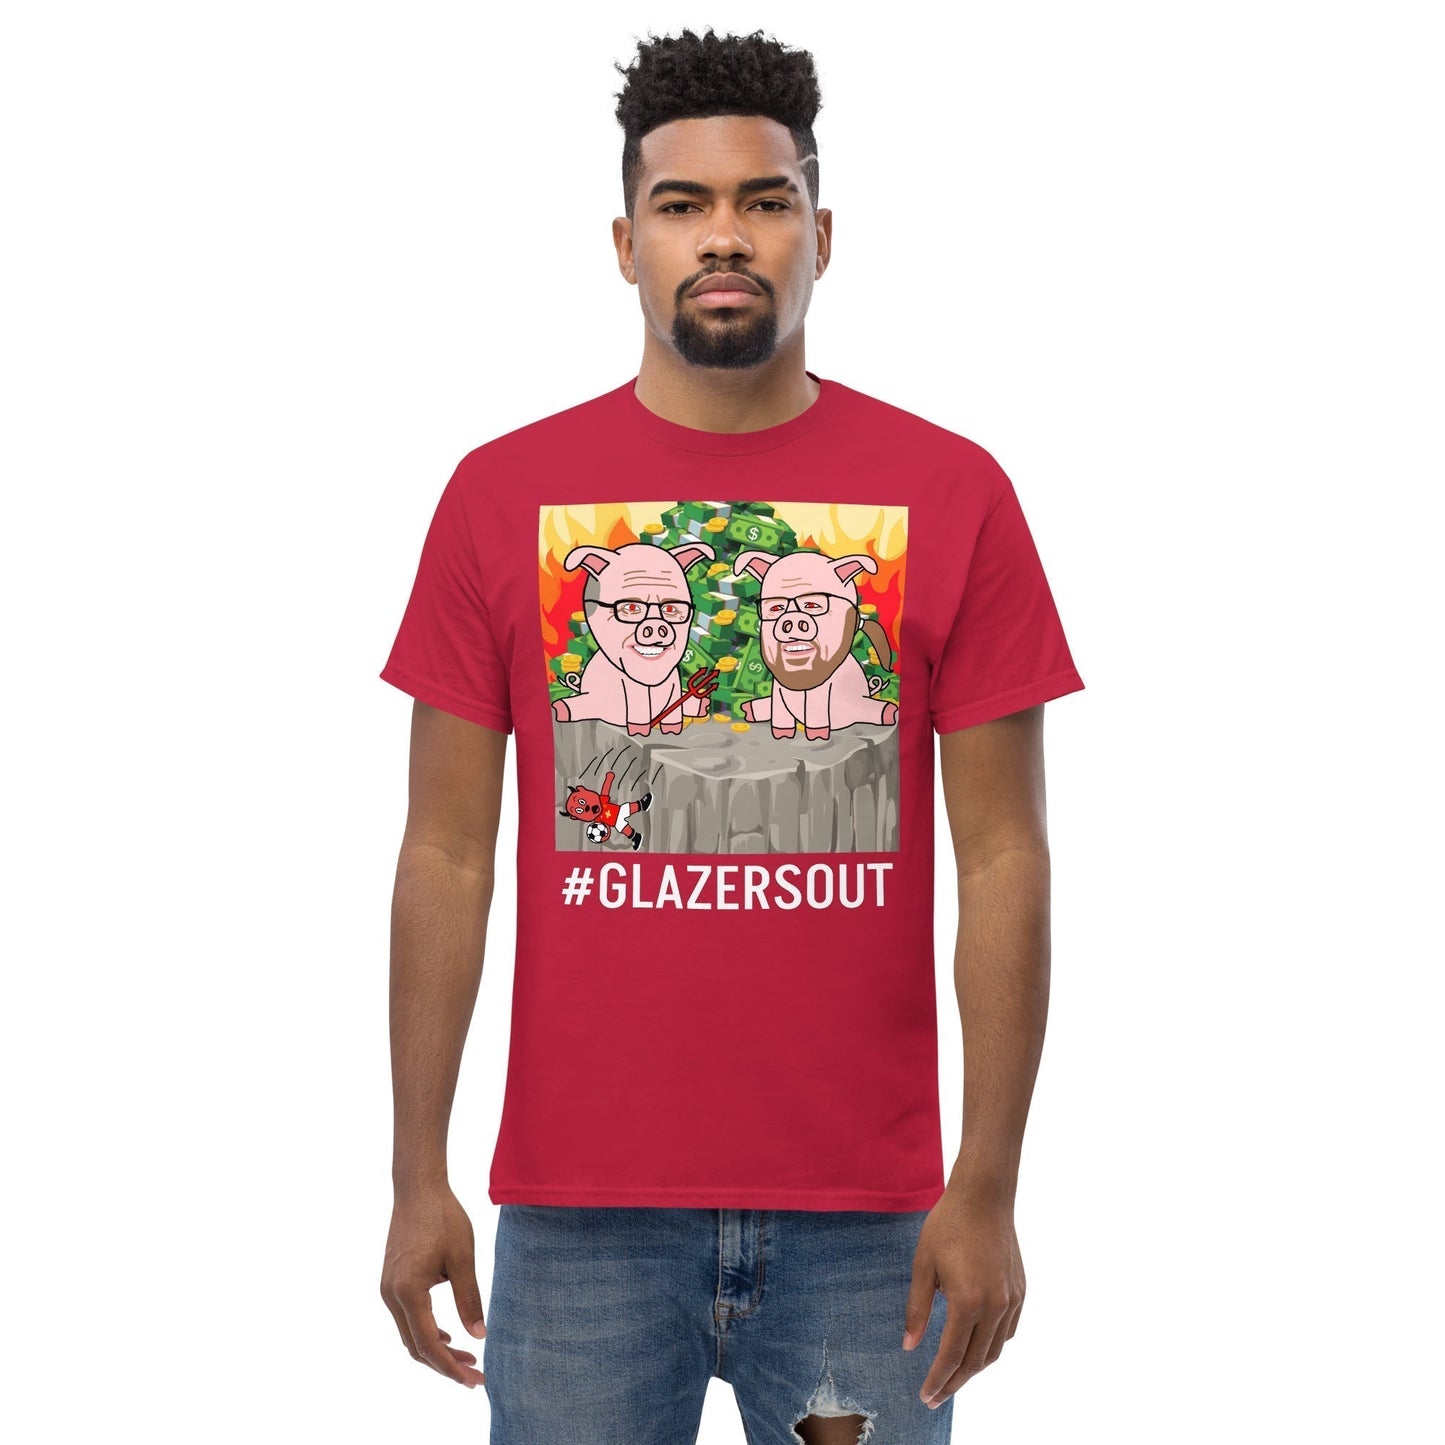 Glazers Out Manchester United T-shirt, White Letters, #GlazersOut Next Cult Brand Football, GlazersOut, Manchester United